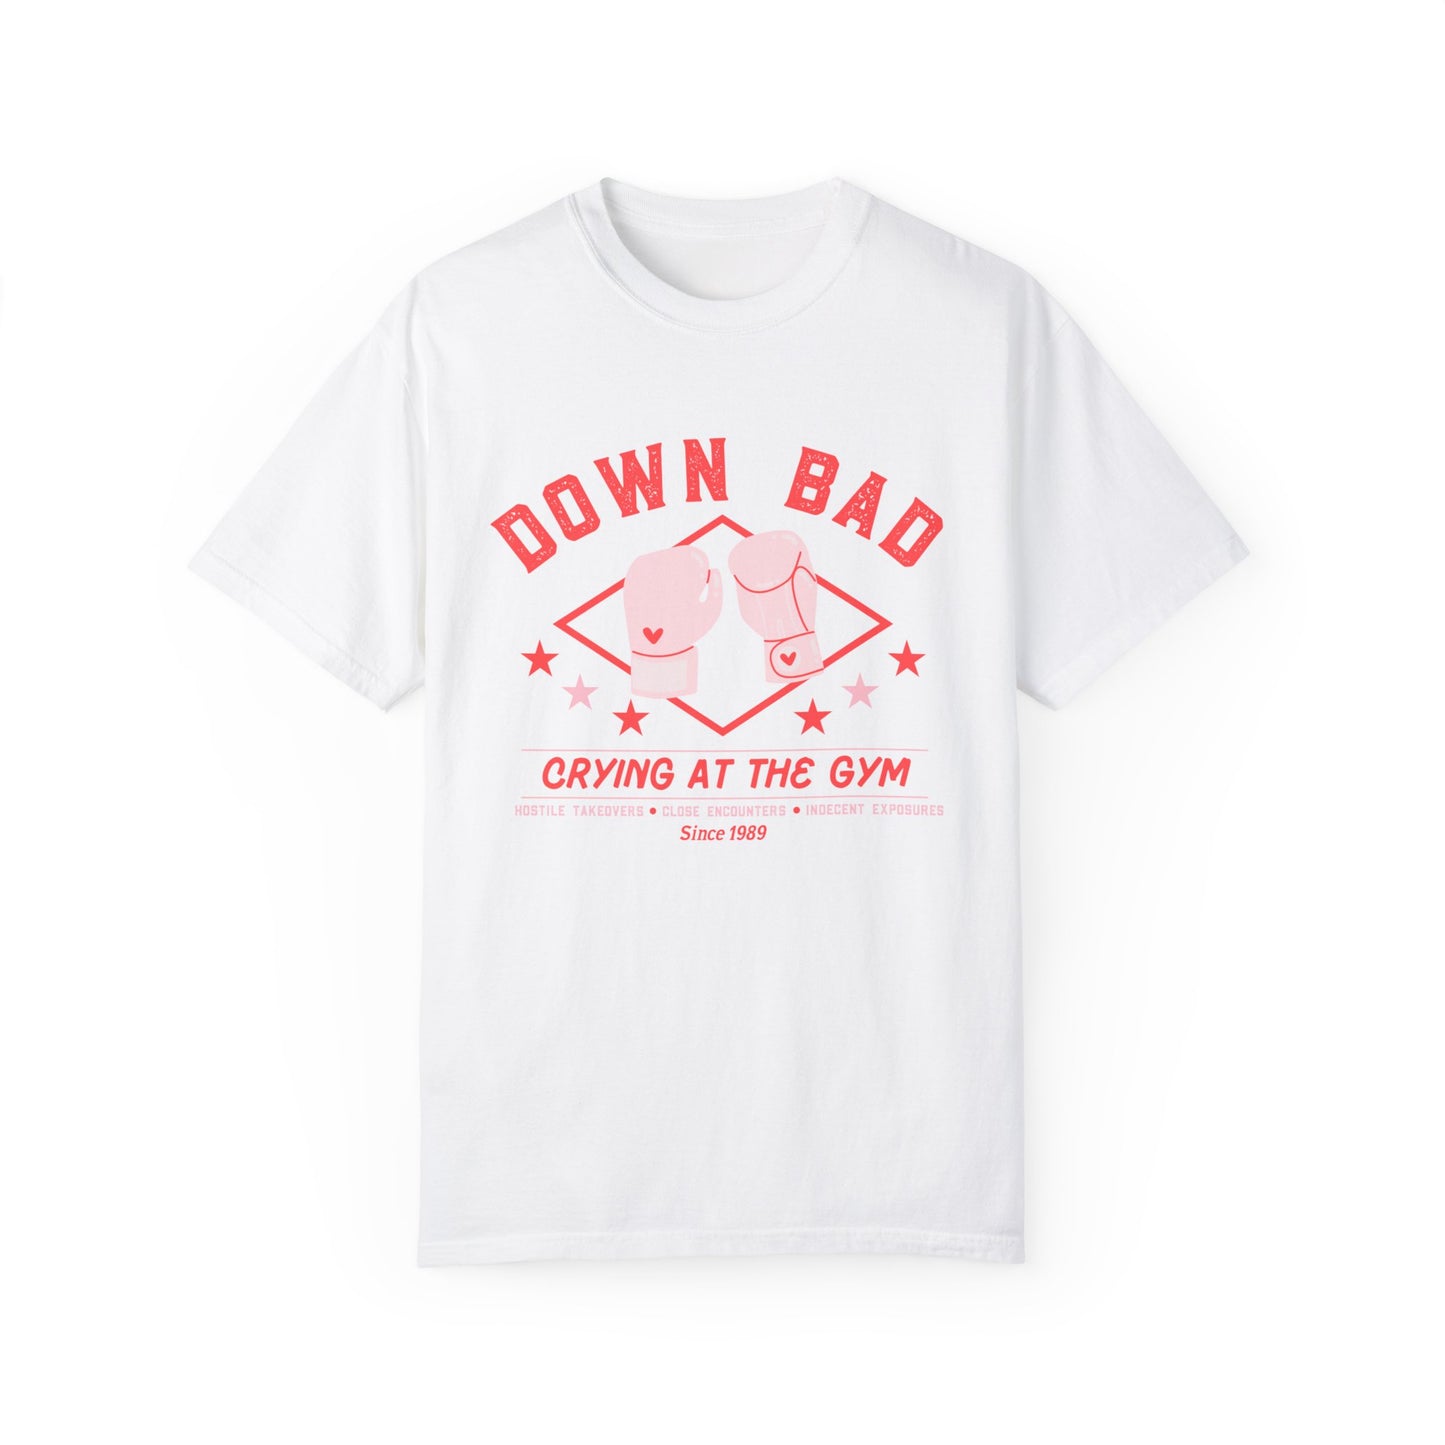 Down Bad Boxing Gloves Garment-Dyed T-shirt